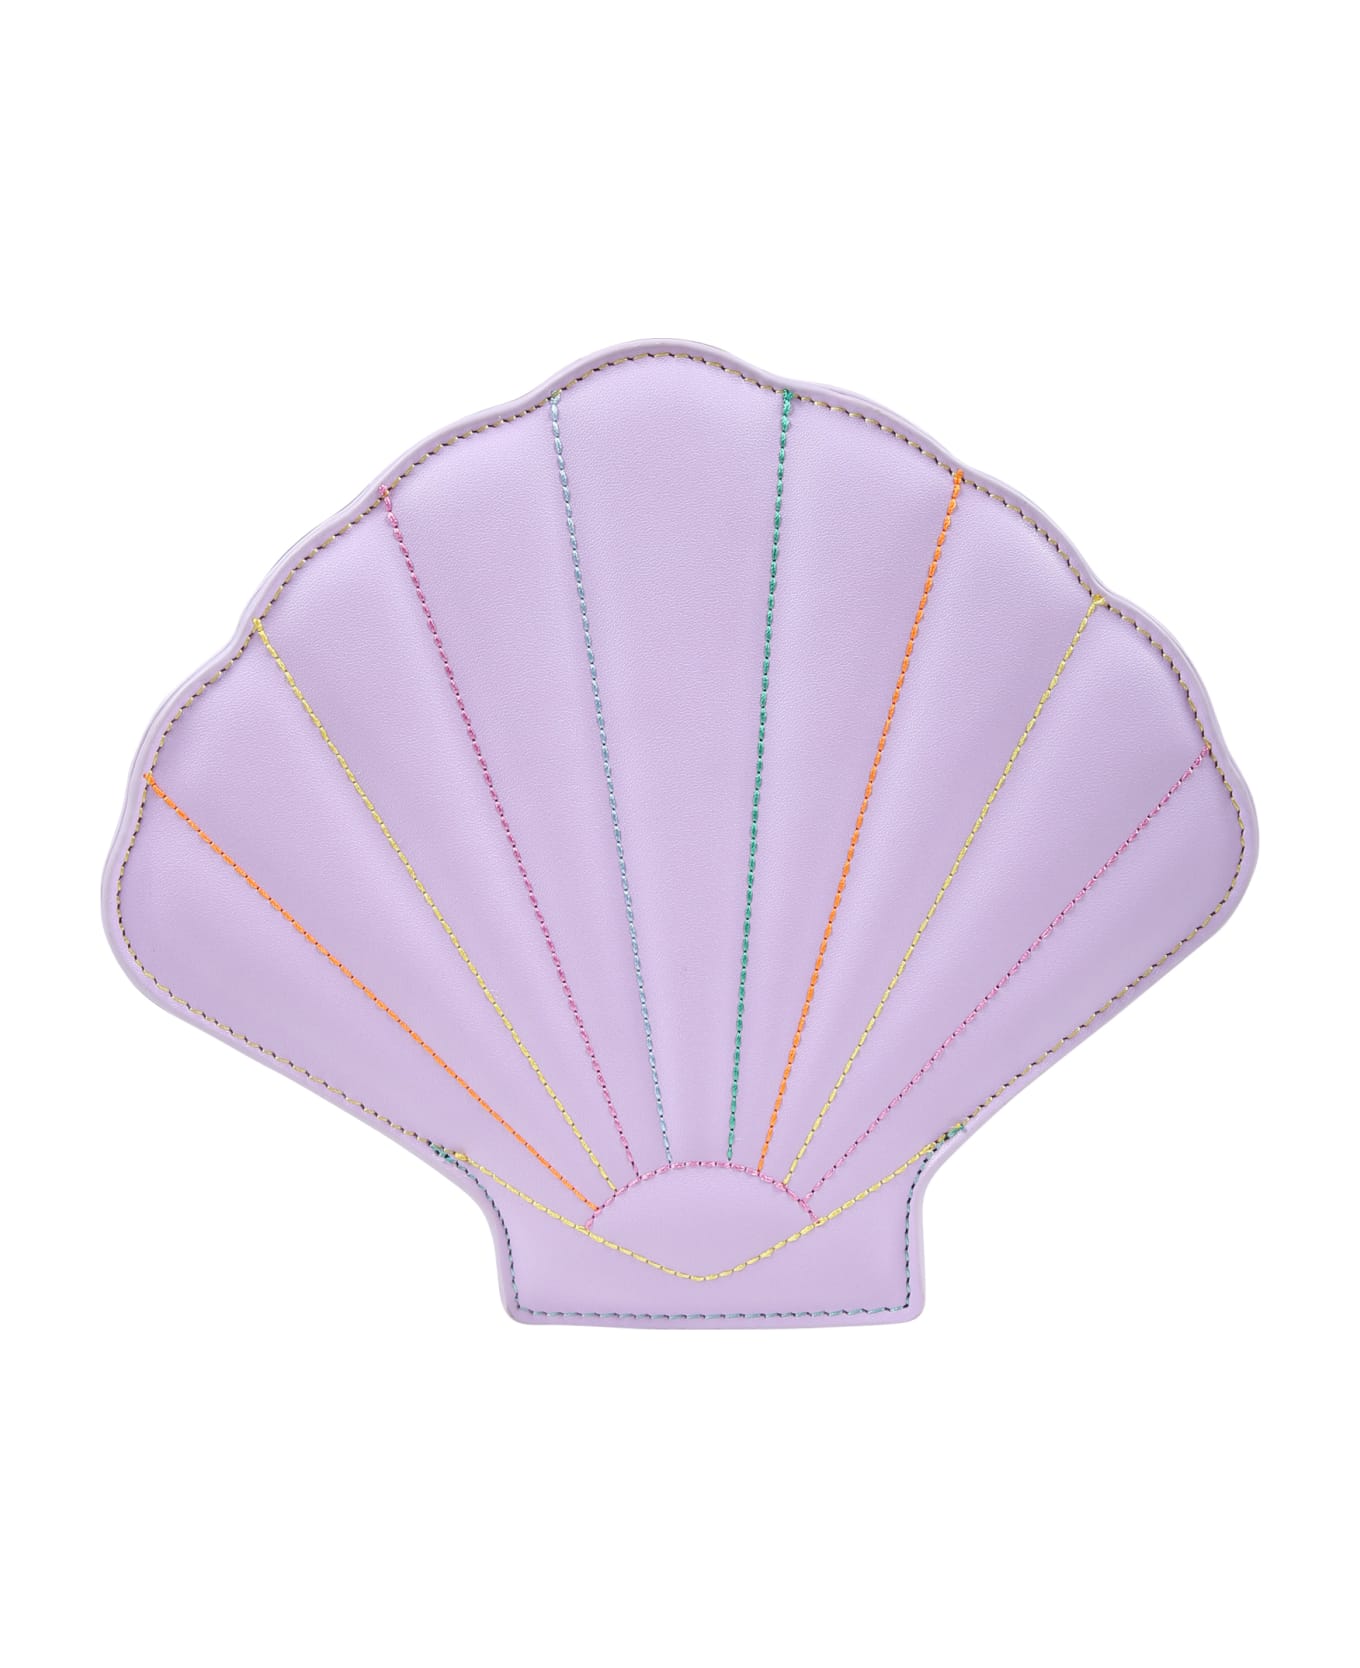 Stella McCartney Kids Purple Bag For Girl With Shell - Violet アクセサリー＆ギフト